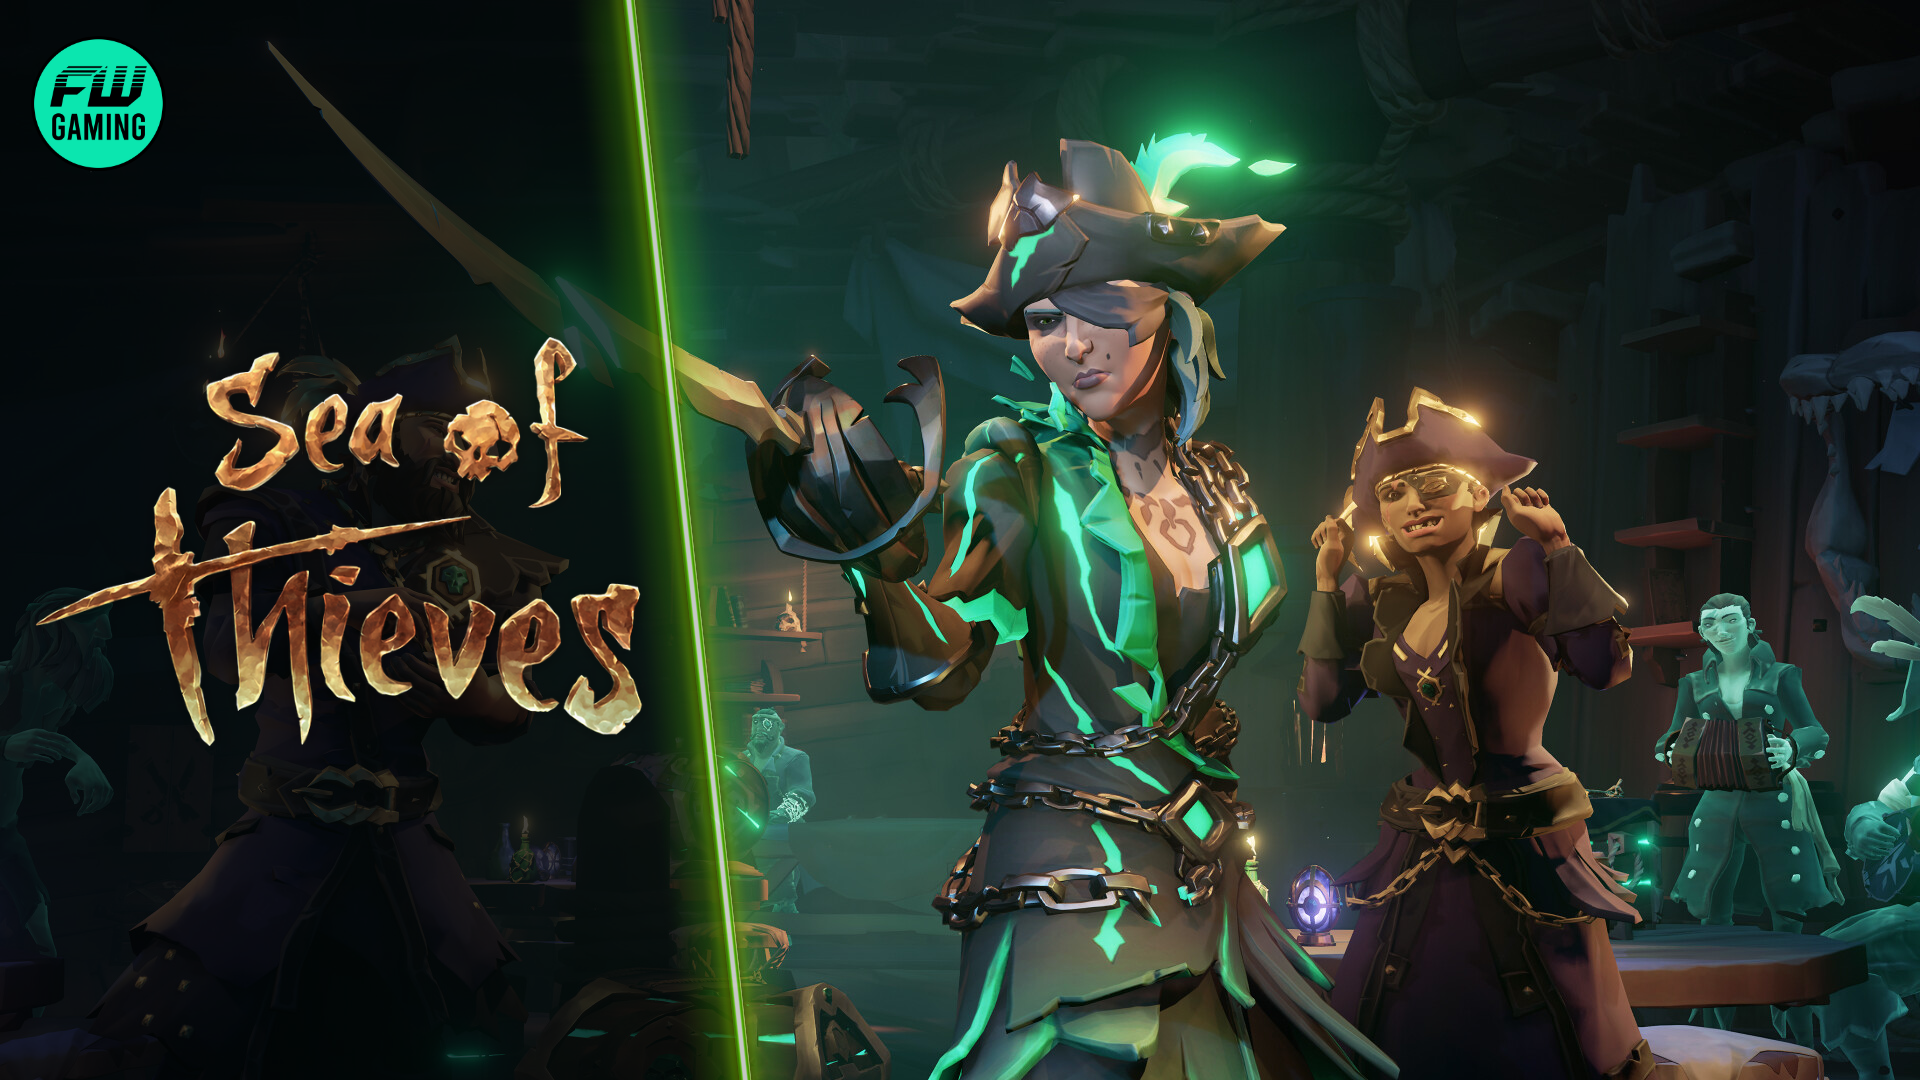 Sea of Thieves Will Be Adding Private Server Feature With Next Update